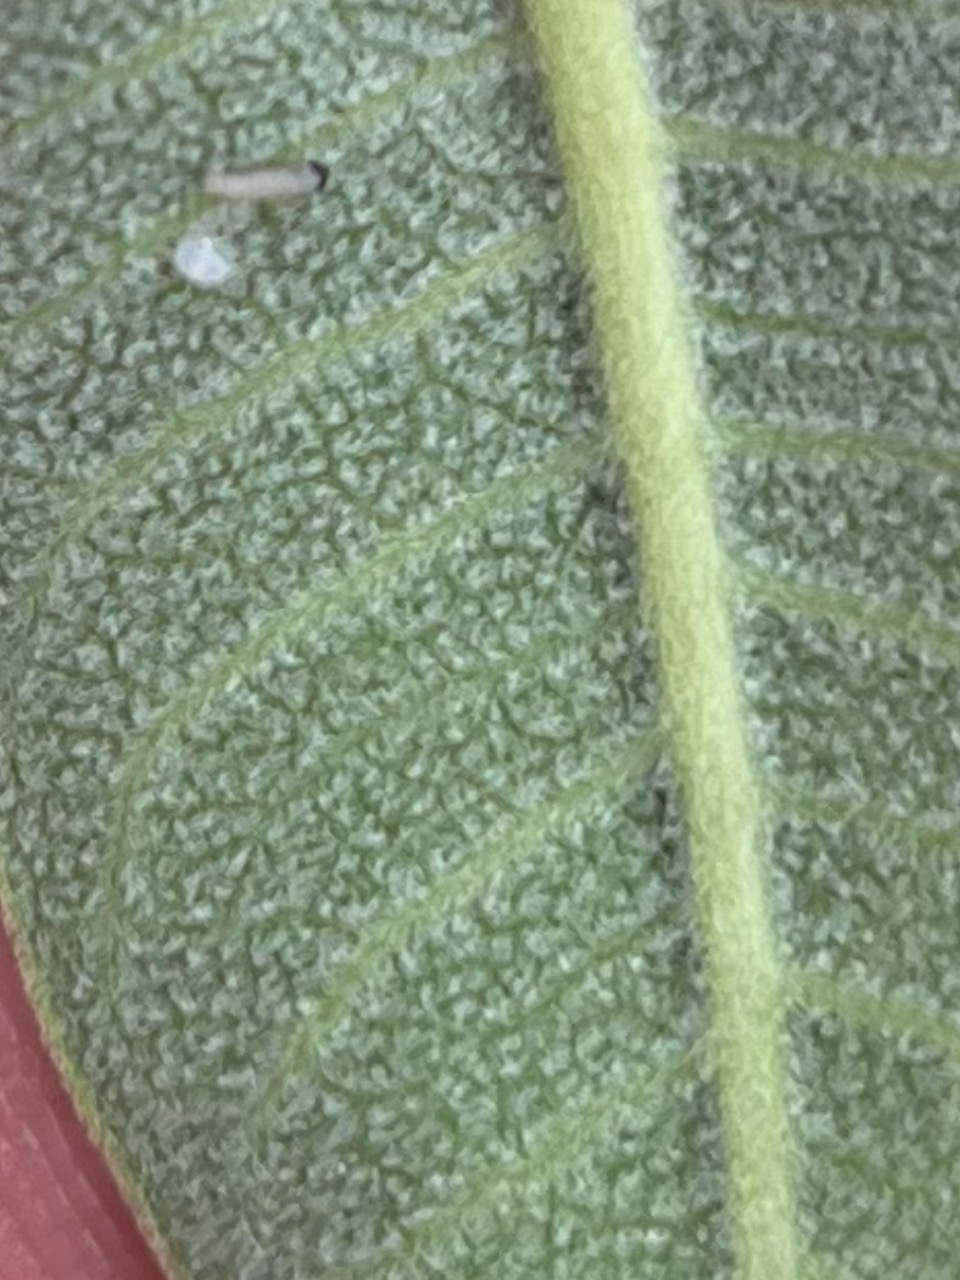 A small caterpillar on the underside of a leaf next to a white spot